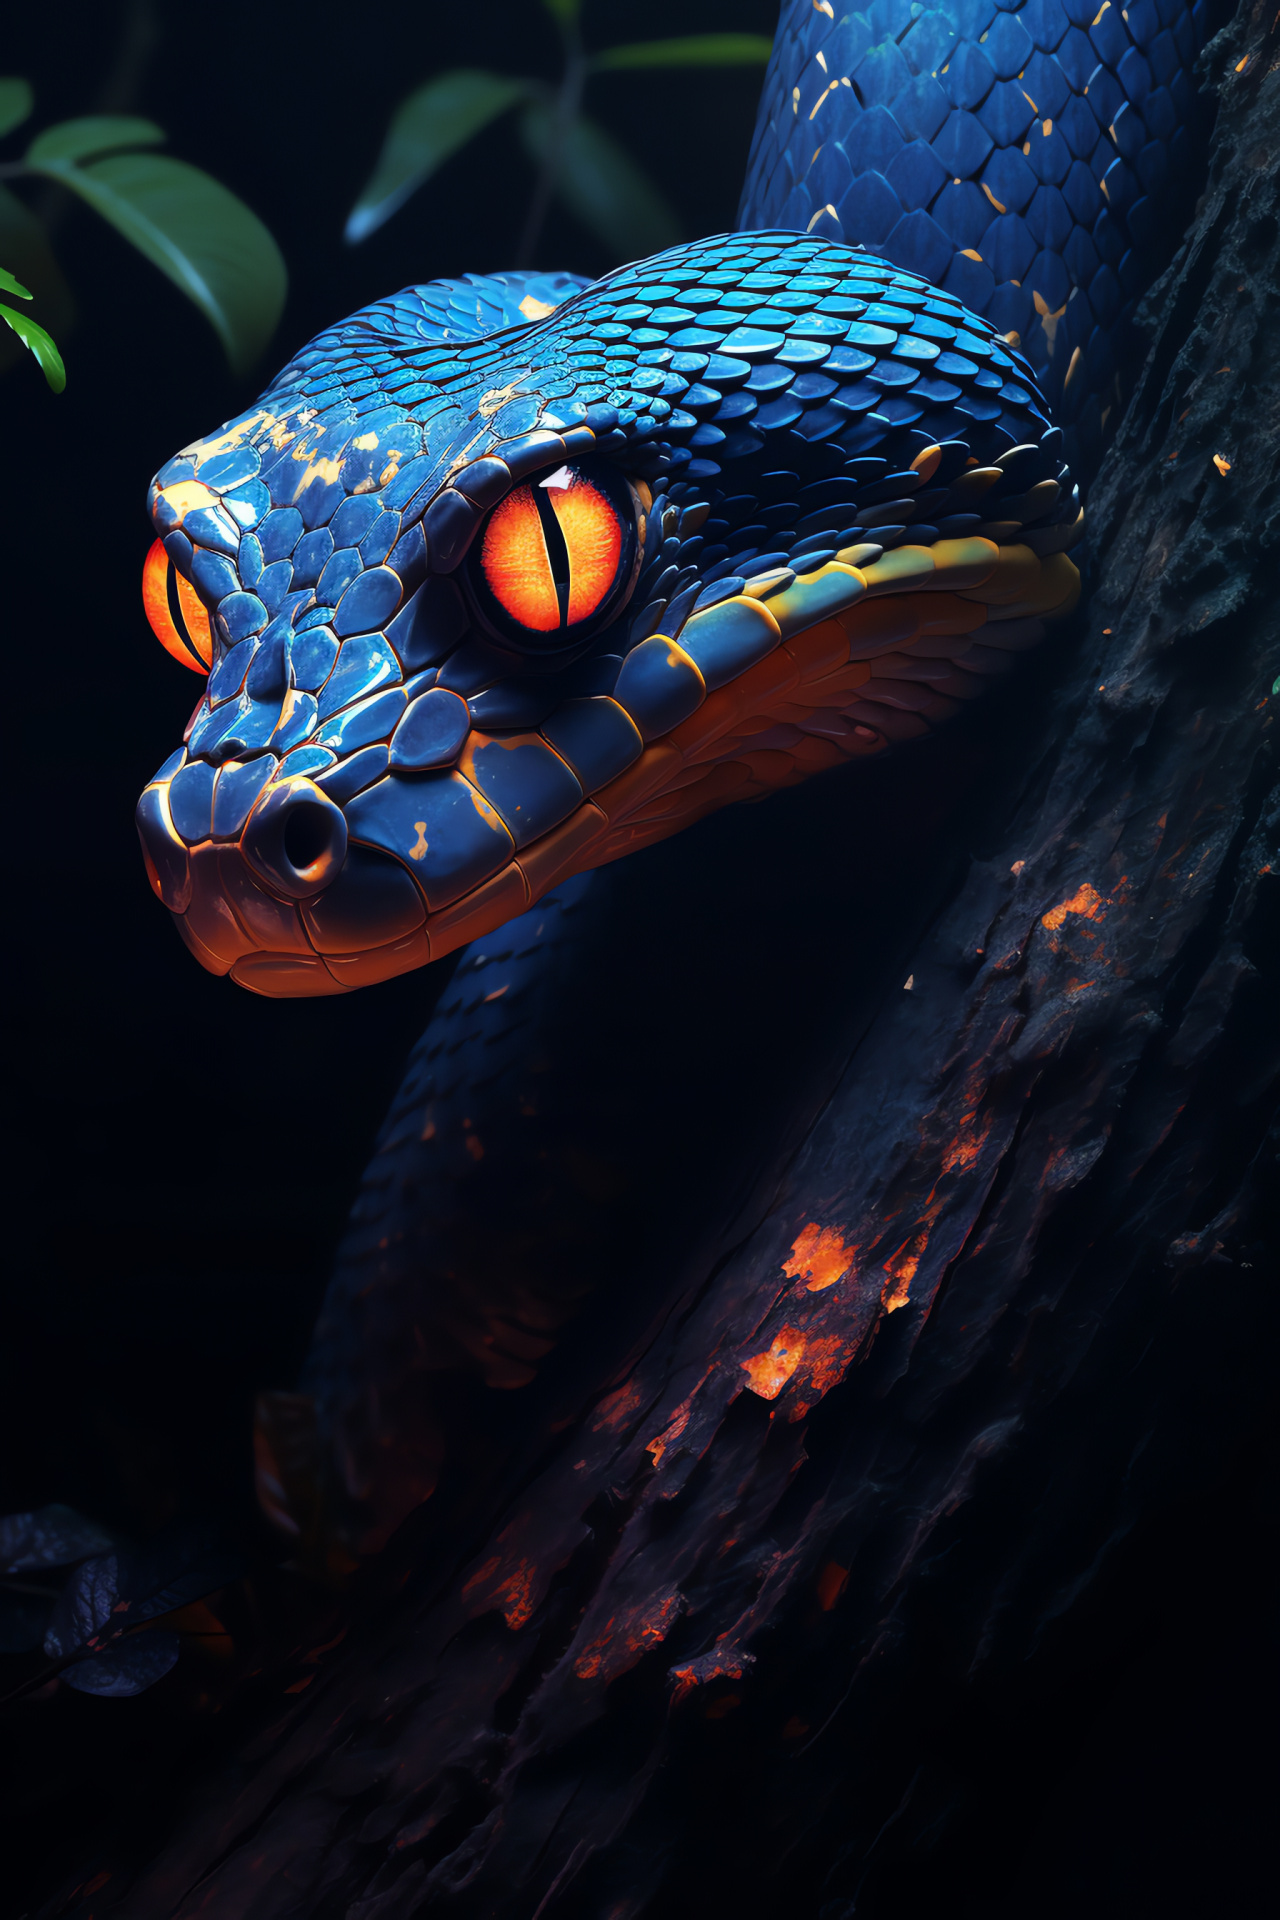 Luminous nocturnal snake, Glowing blue eyes, Radiant forest reptile, Vivid orange and yellow patterns, Tree-dwelling serpent, HD Phone Image